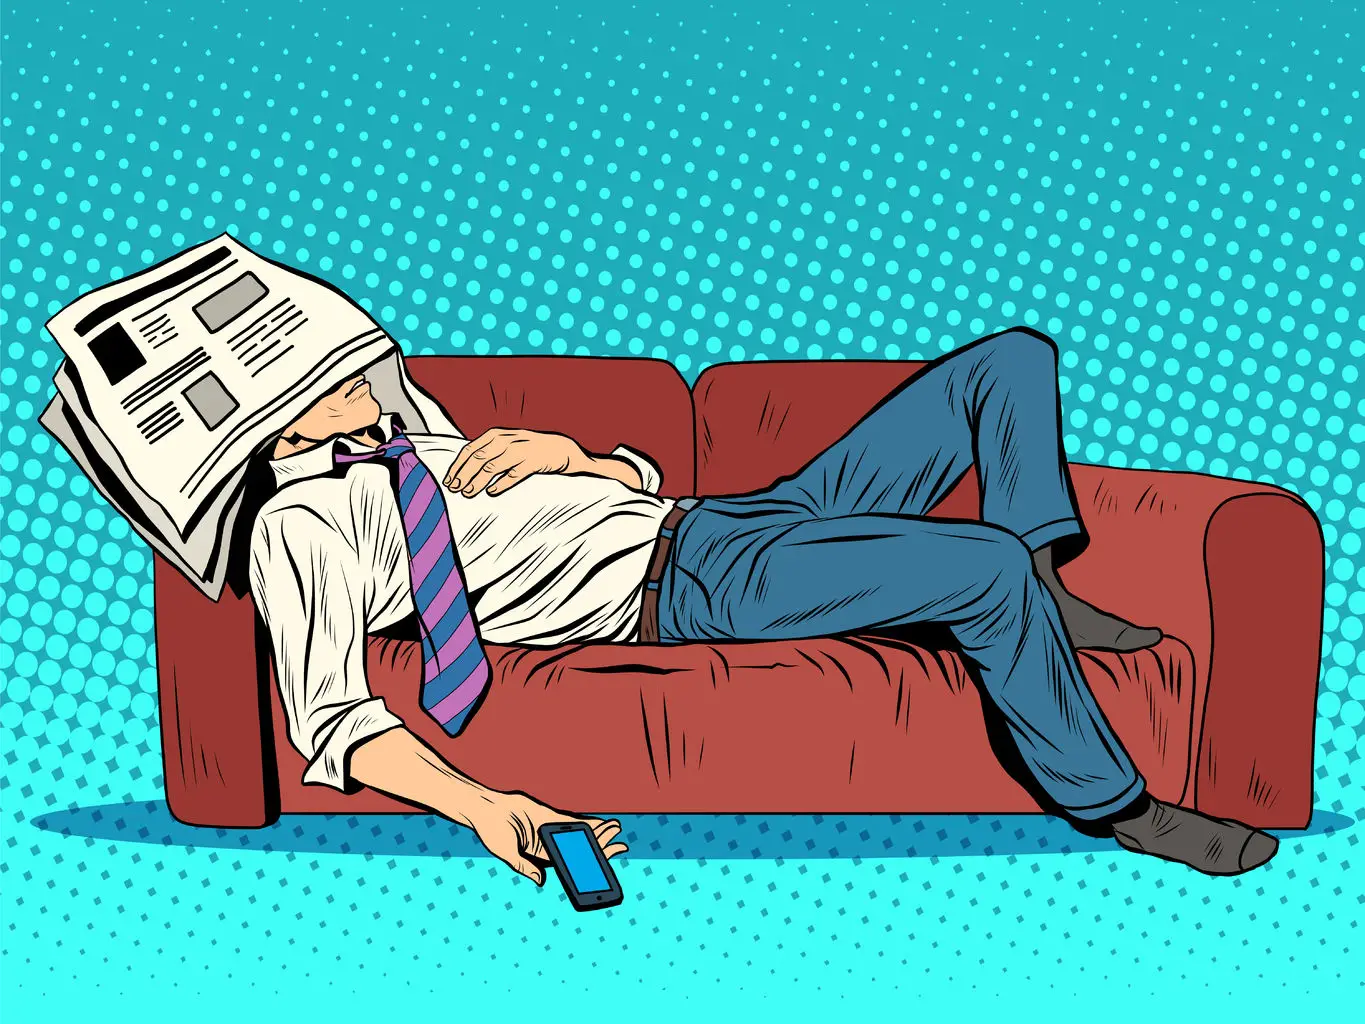 54399570 - rest fatigue sleep on the couch siesta pop art style retro. businessman tired. a man sleeps. laziness and a bad day